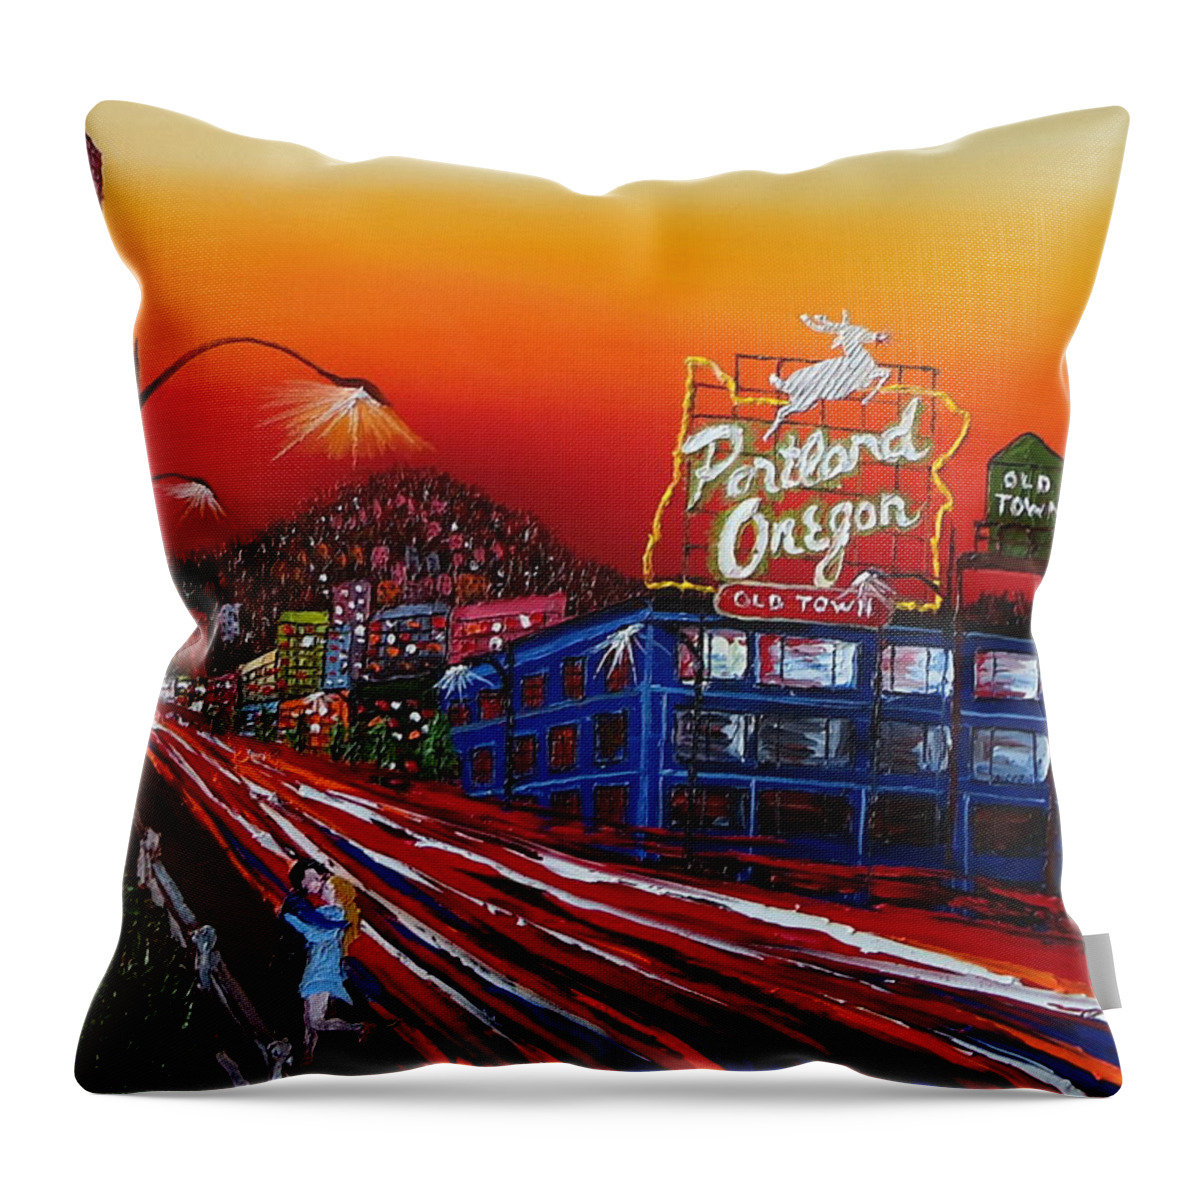 Portland City Lights Throw Pillow featuring the painting Portland Oregon Sign At Dusk by James Dunbar